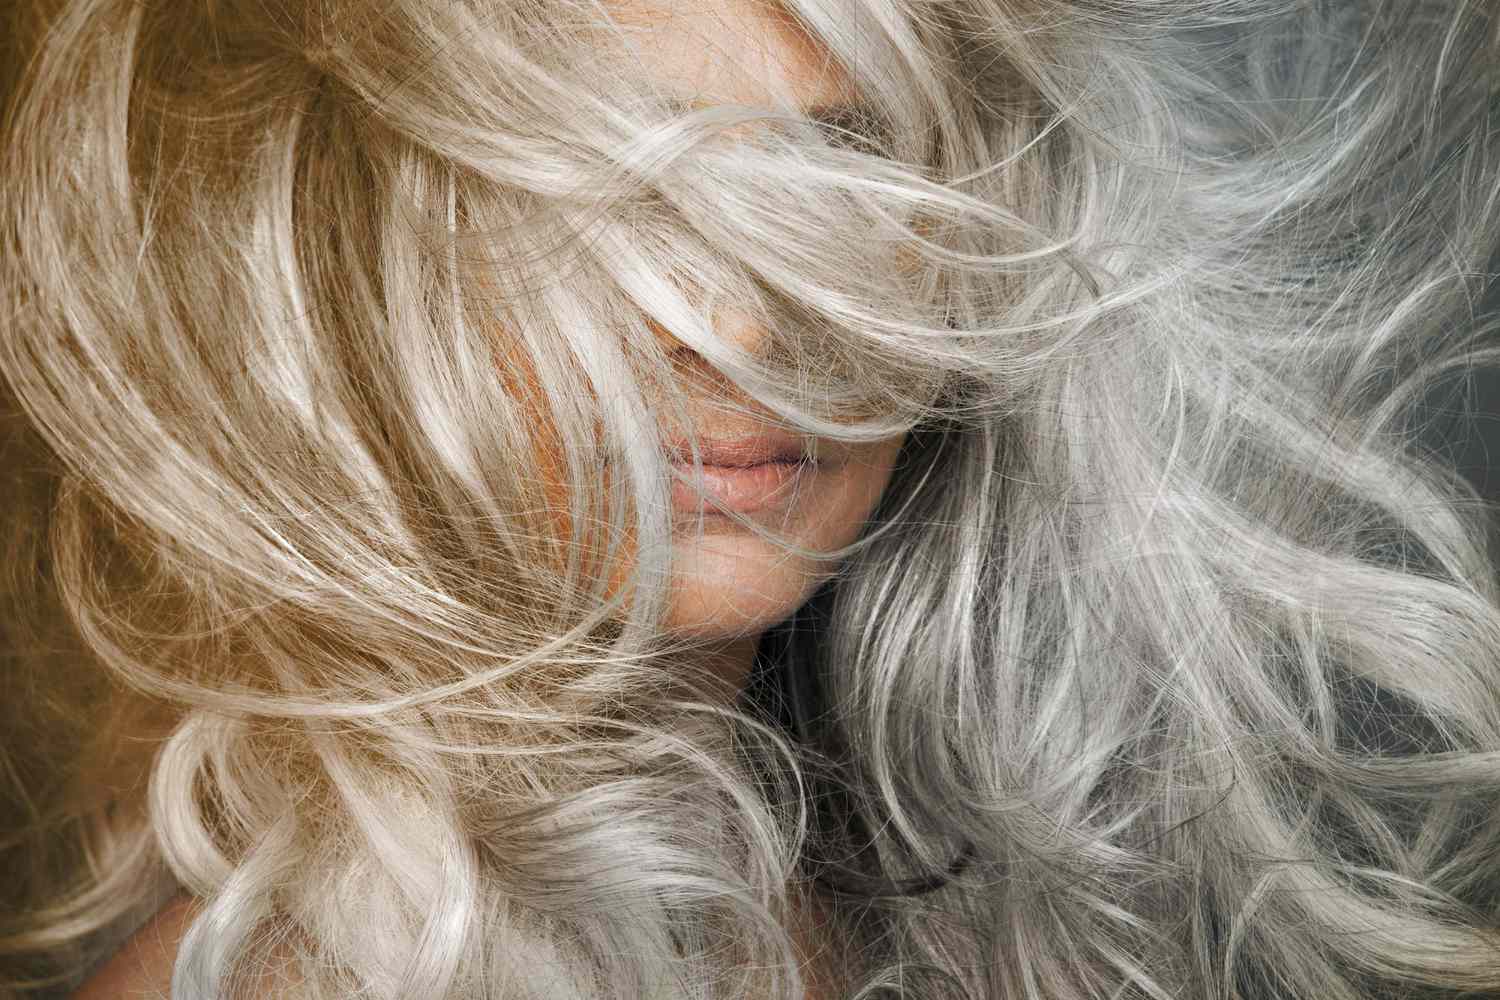 Woman with grey hair blowing across her face.